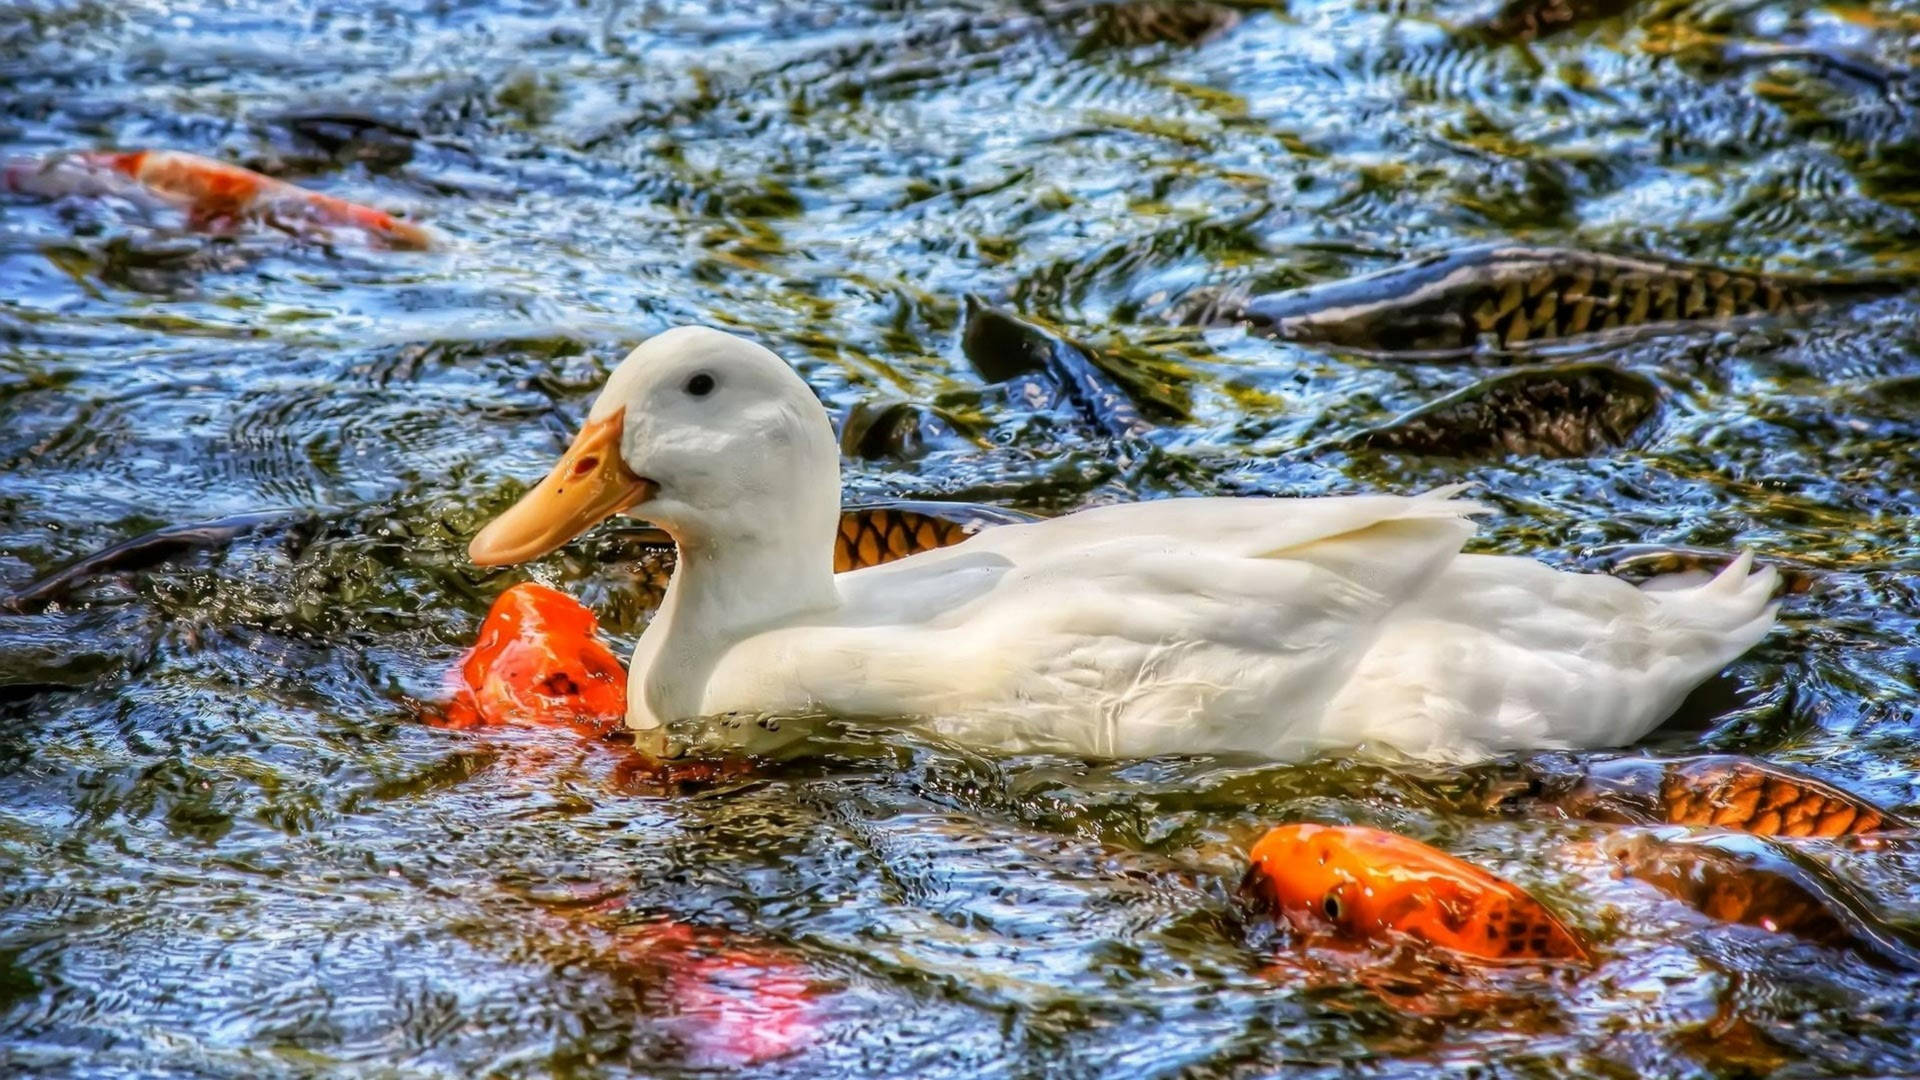 White Duck And Fishes Background